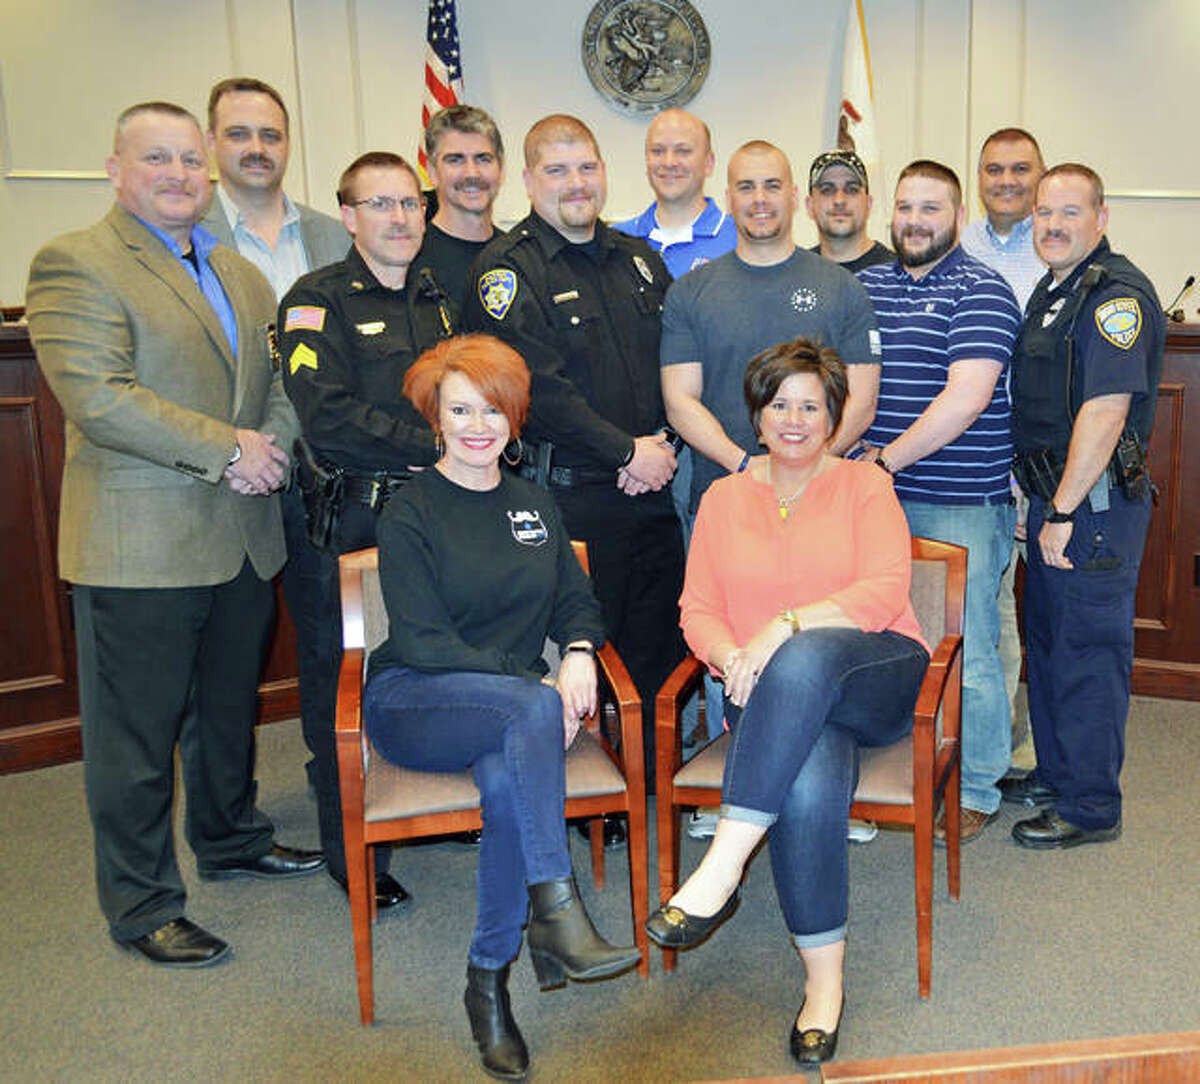 A few of the people participating in Mustache March 4 PD to raise funds for area police, include from front left, committee members Vicki Hosto and Joell Aguirre; second row, Jerseyville Deputy Chief of Police Scott Woelfel, JPD Sgt. John Lawson, Alton Police Department patrolman Elliott Fergurson, APD Det. Jim Siatos, APD Sgt. Jeremiah Dressler, and Wood River Police Department officer Chris Alfaro; back row, JPD Chief of Police Brad Blackorby, committee chair Steve Schwegel, president of the Police Benevolent and Protective Association Alton Unit 14 and APD Det. Andrew Pierson, APD canine handler Mike Morelli, and committee member Johnny Aguirre.